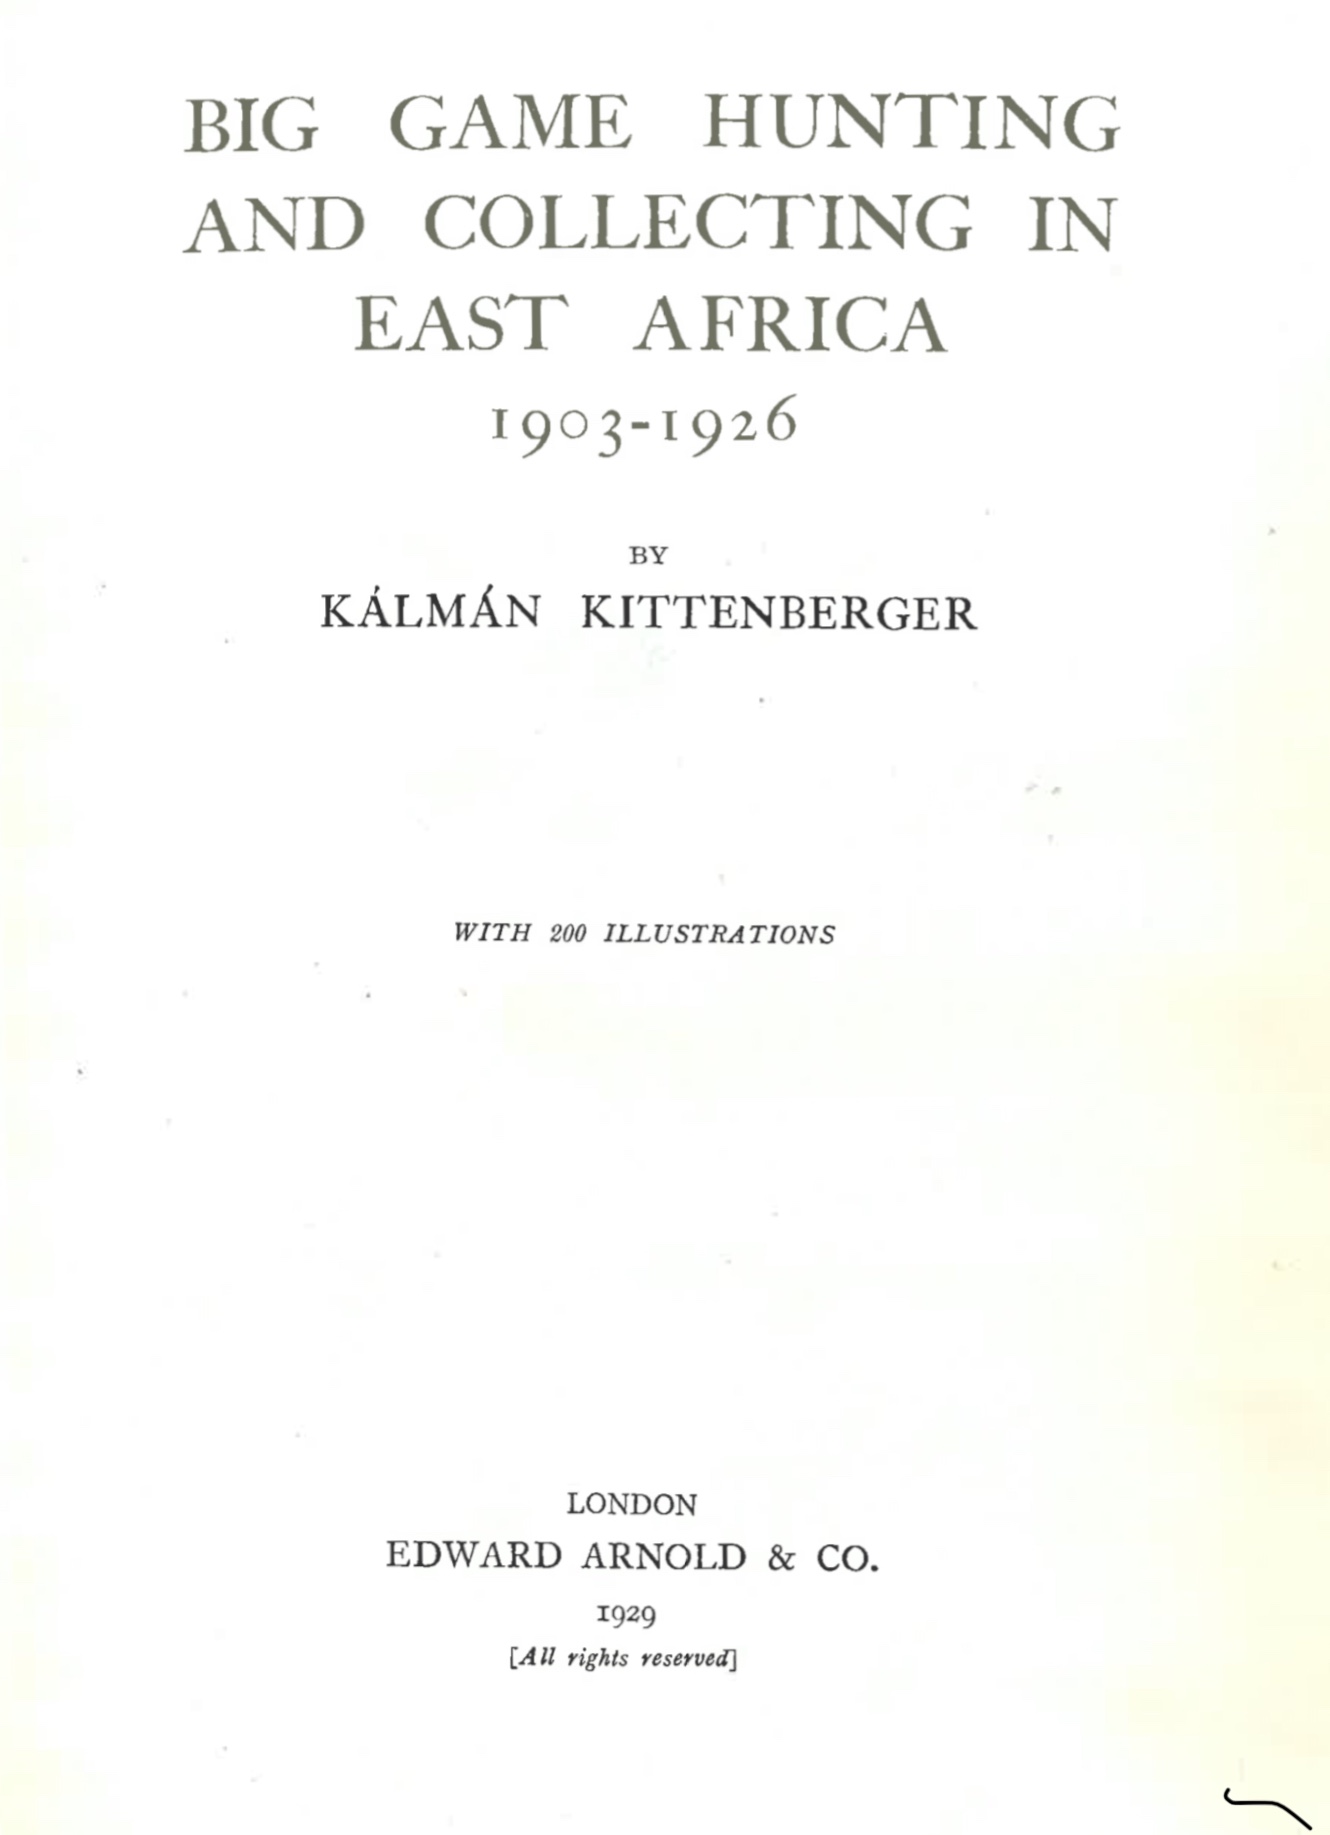 Big game hunting and collecting in East Africa, 1903–1926, London, Arnold, 1929. – Törzsgyűjtemény